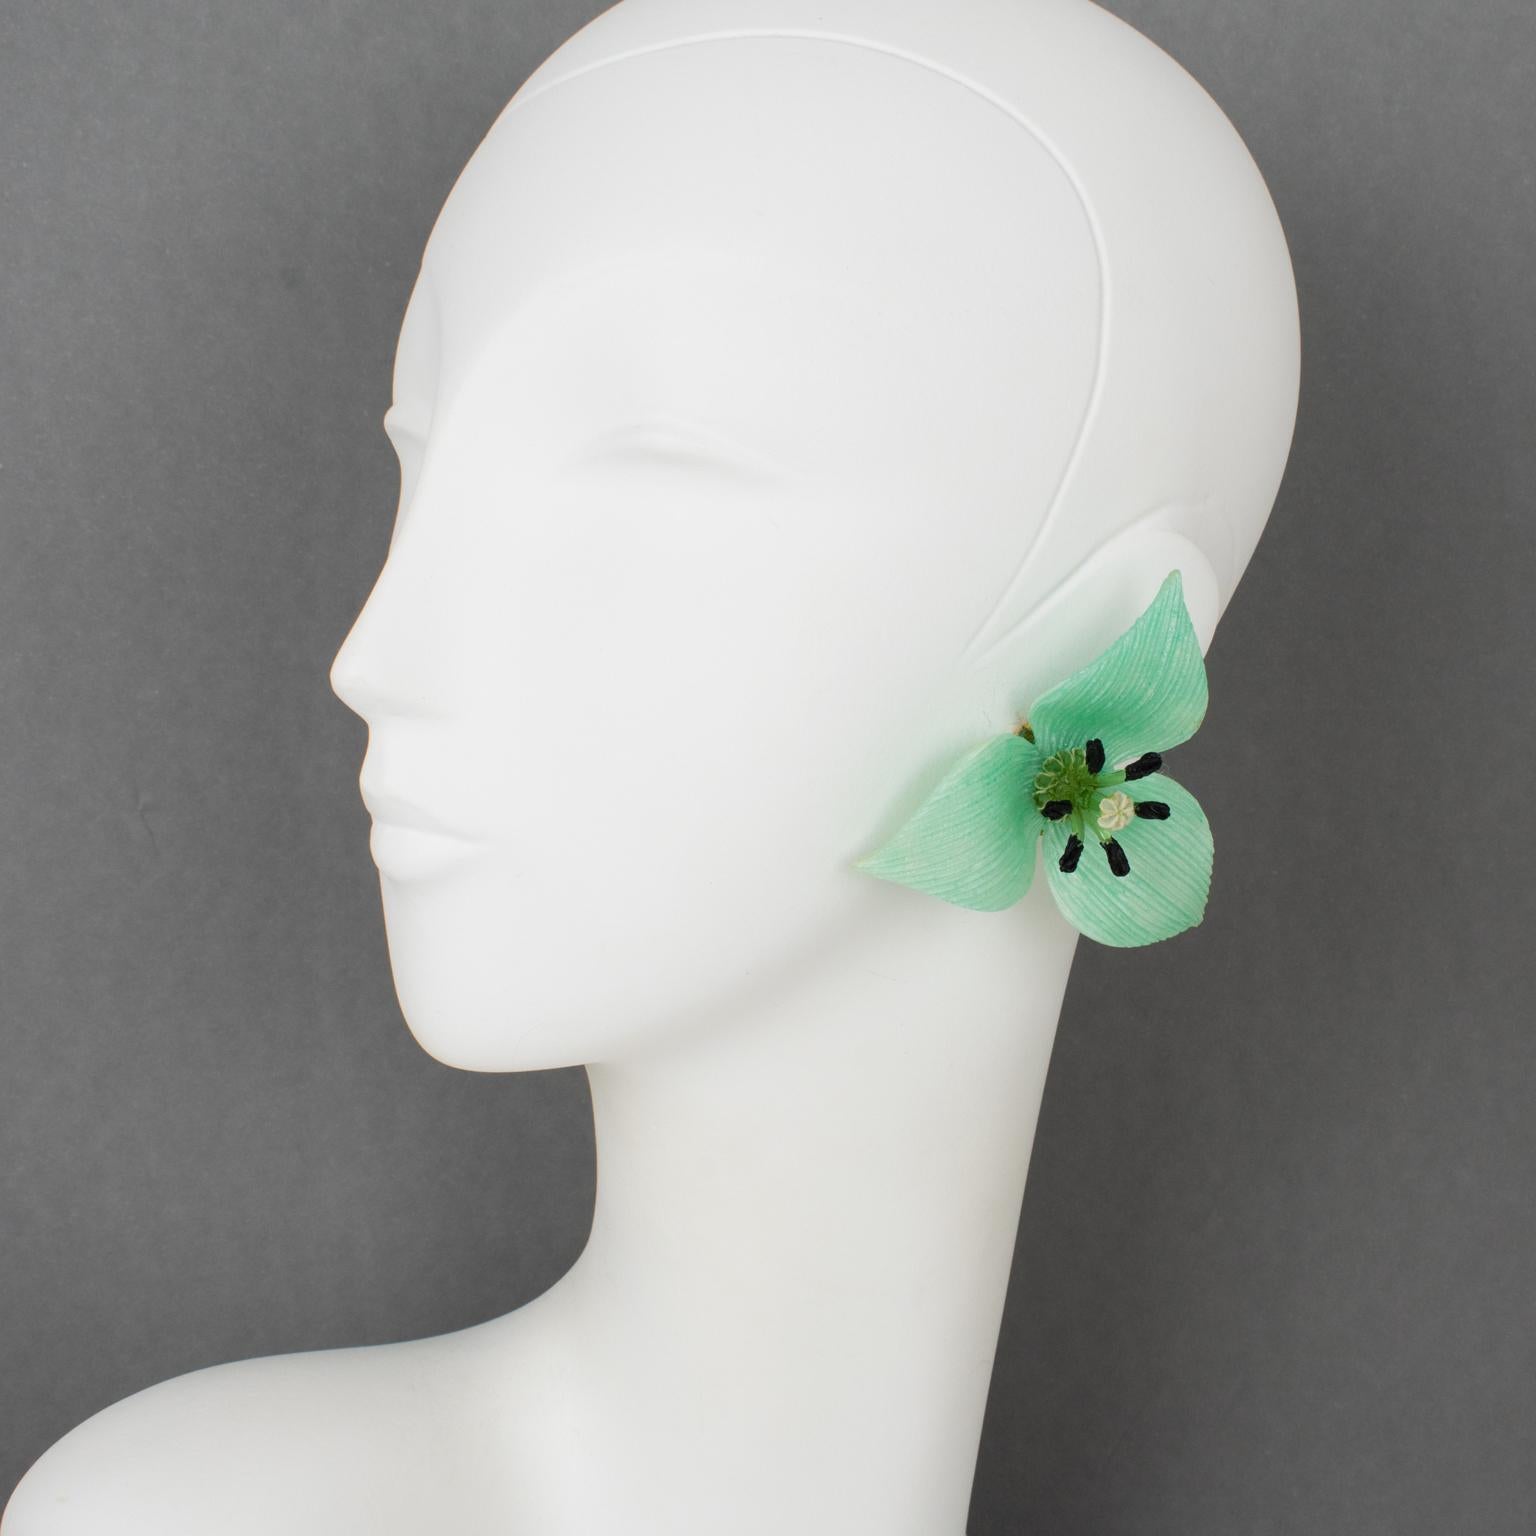 French Jewelry Designer Francoise Montague Paris designed these stunning oversized resin clip-on earrings. The dimensional flower shape boasts light turquoise resin petals with a textured pattern contrasted with a black and white colored resin